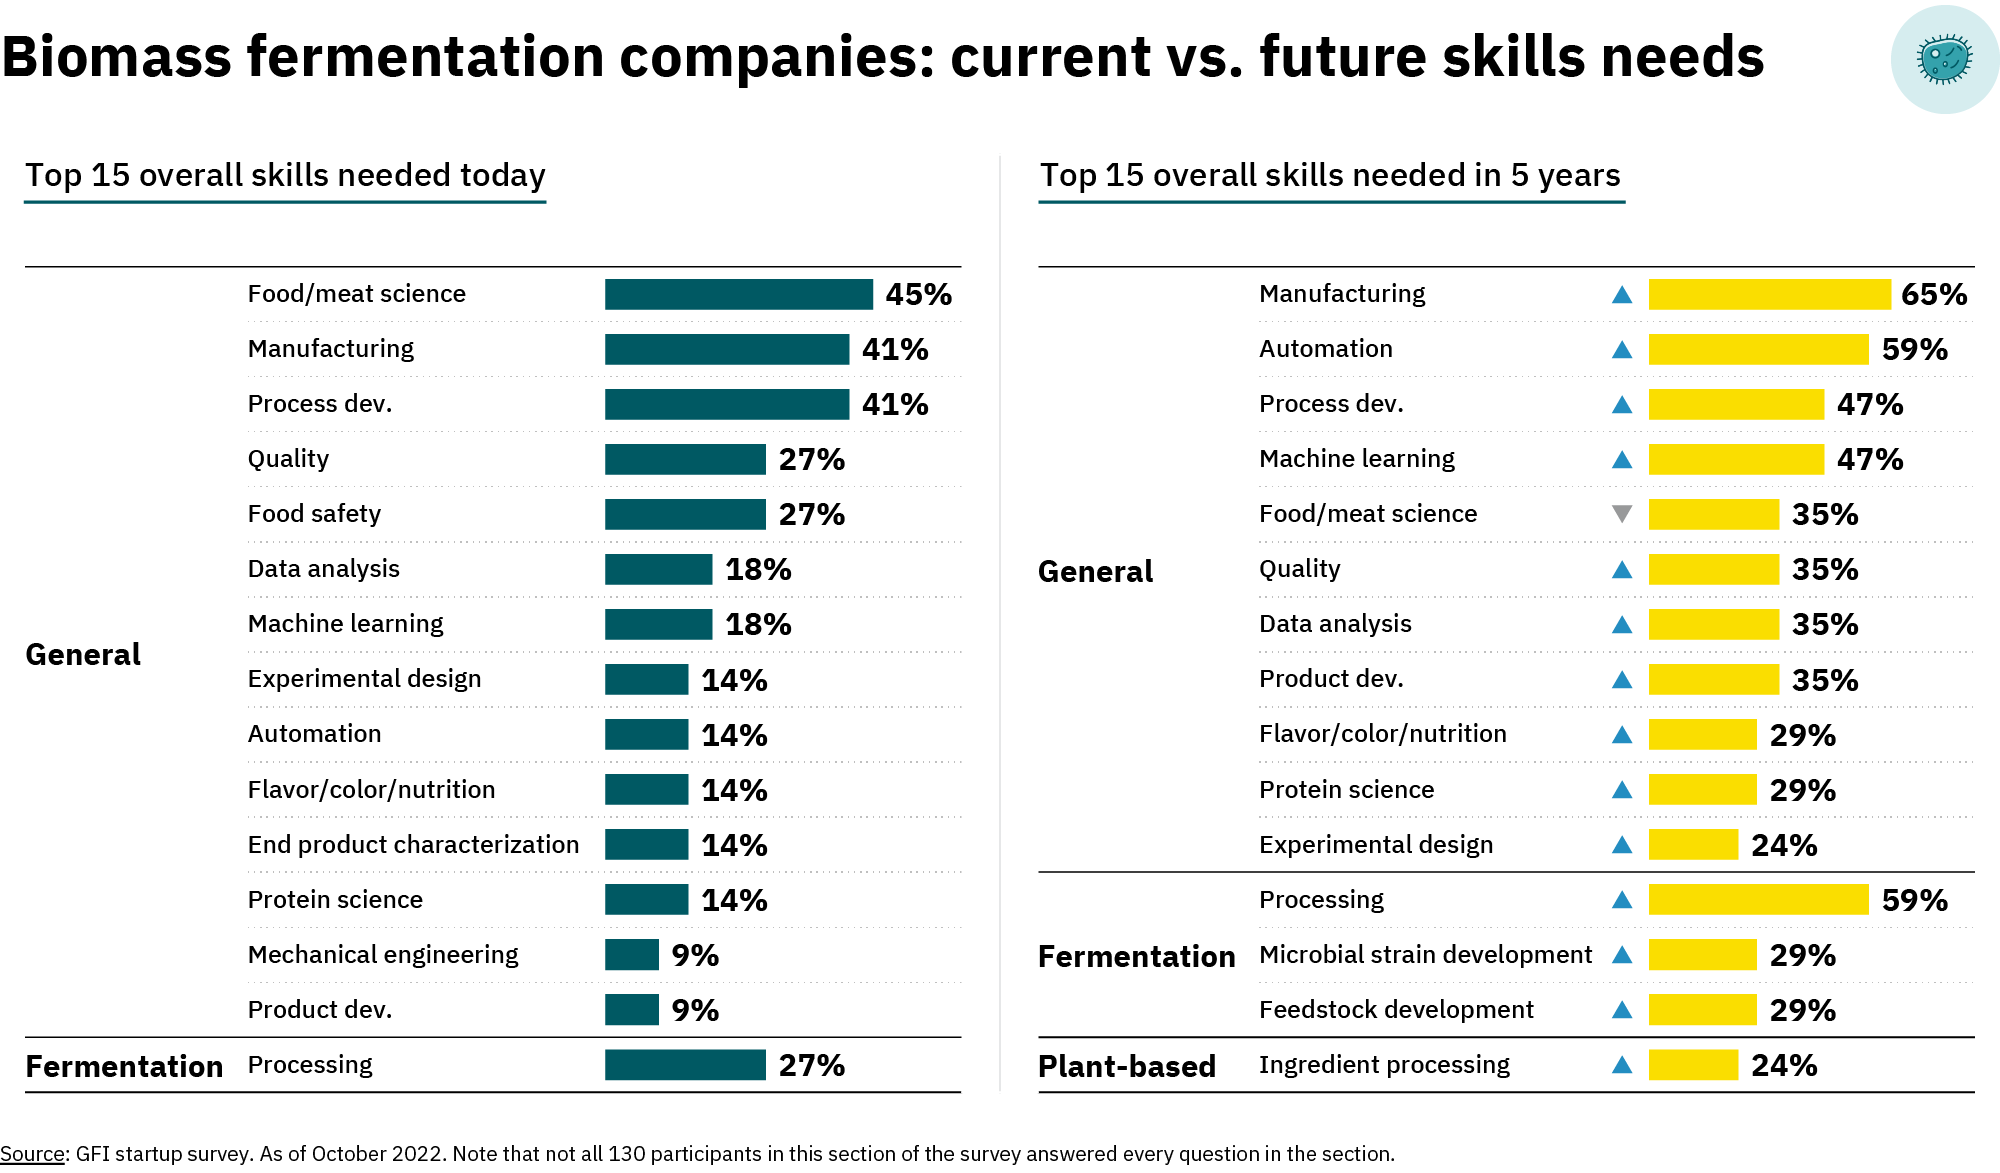 Biomass fermentation companies: current vs. Future skills needs; top 15 overall skills needed today - general: food/meat science 45%, manufacturing 41%, process dev. 41%, quality 27%, food safety 27%, data analysis 18%, machine learning 18%, experimental design 14%, automation 14%, flavor/color/nutrition 14%, end product characterization 14%, protein science 14%, mechanical engineering 9%, product dev 9%; fermentation: processing 27%; top 15 overall skills needed in 5 years - general: manufacturing 65%, automation 59%, process dev 47%, machine learning 47%, food/meat science 35%, quality 35%, data analysis 35%, product dev 35%, flavor/color/nutrition 29%, protein science 29%, experimental design 24%; fermentation: processing 59%, microbial strain development 29%, feedstock development 29%; plant-based: ingredient processing 24%